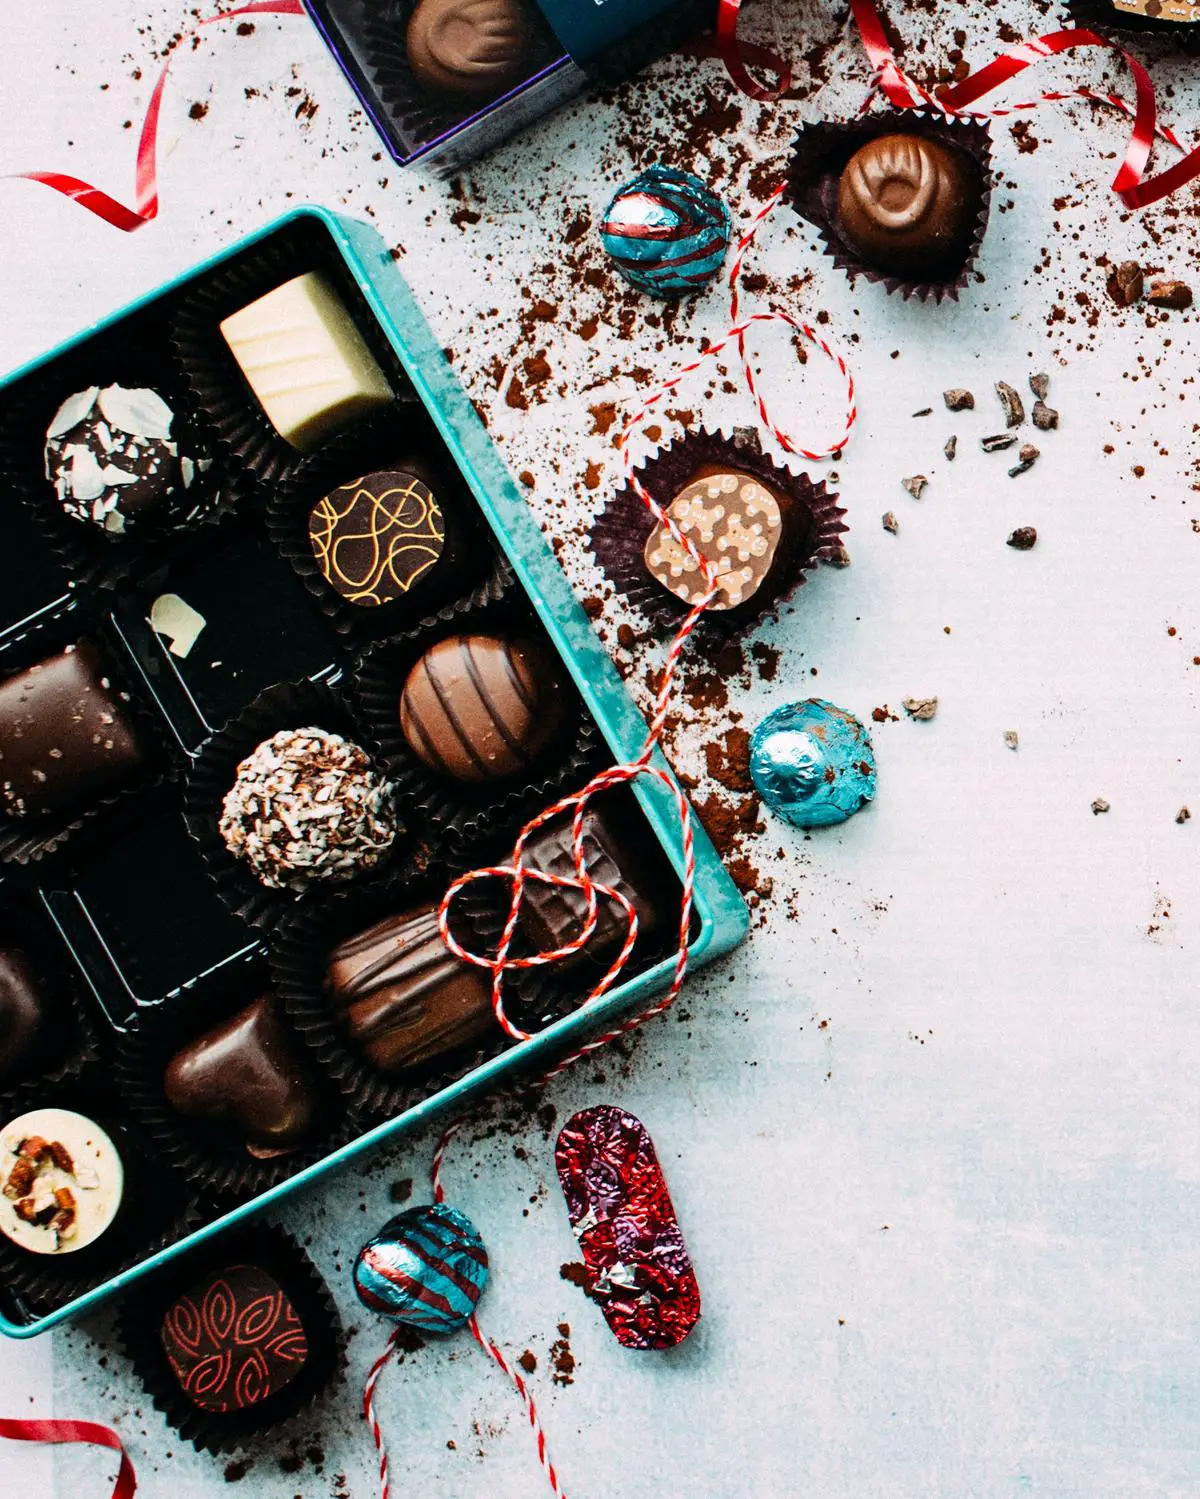 A mouthwatering image of a wide assortment of Costco chocolates, showcasing the store's varied chocolate offerings and appealing to chocolate lovers and bargain hunters alike.